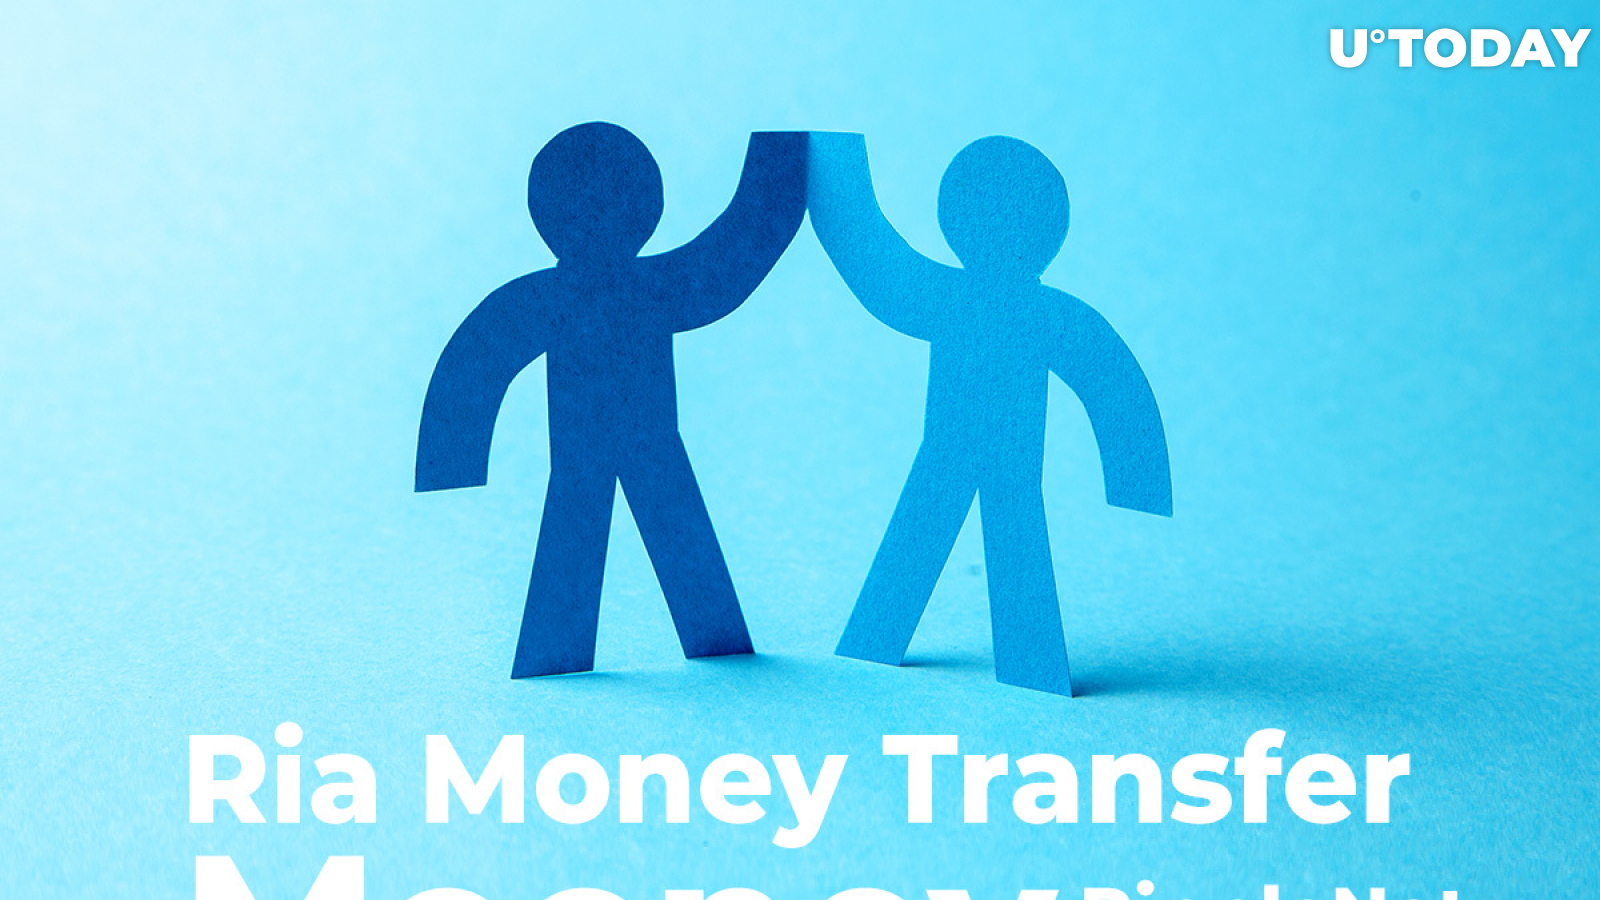 Ripple Partner Ria Money Transfer Teams Up with Leading Payment Platform Mooney